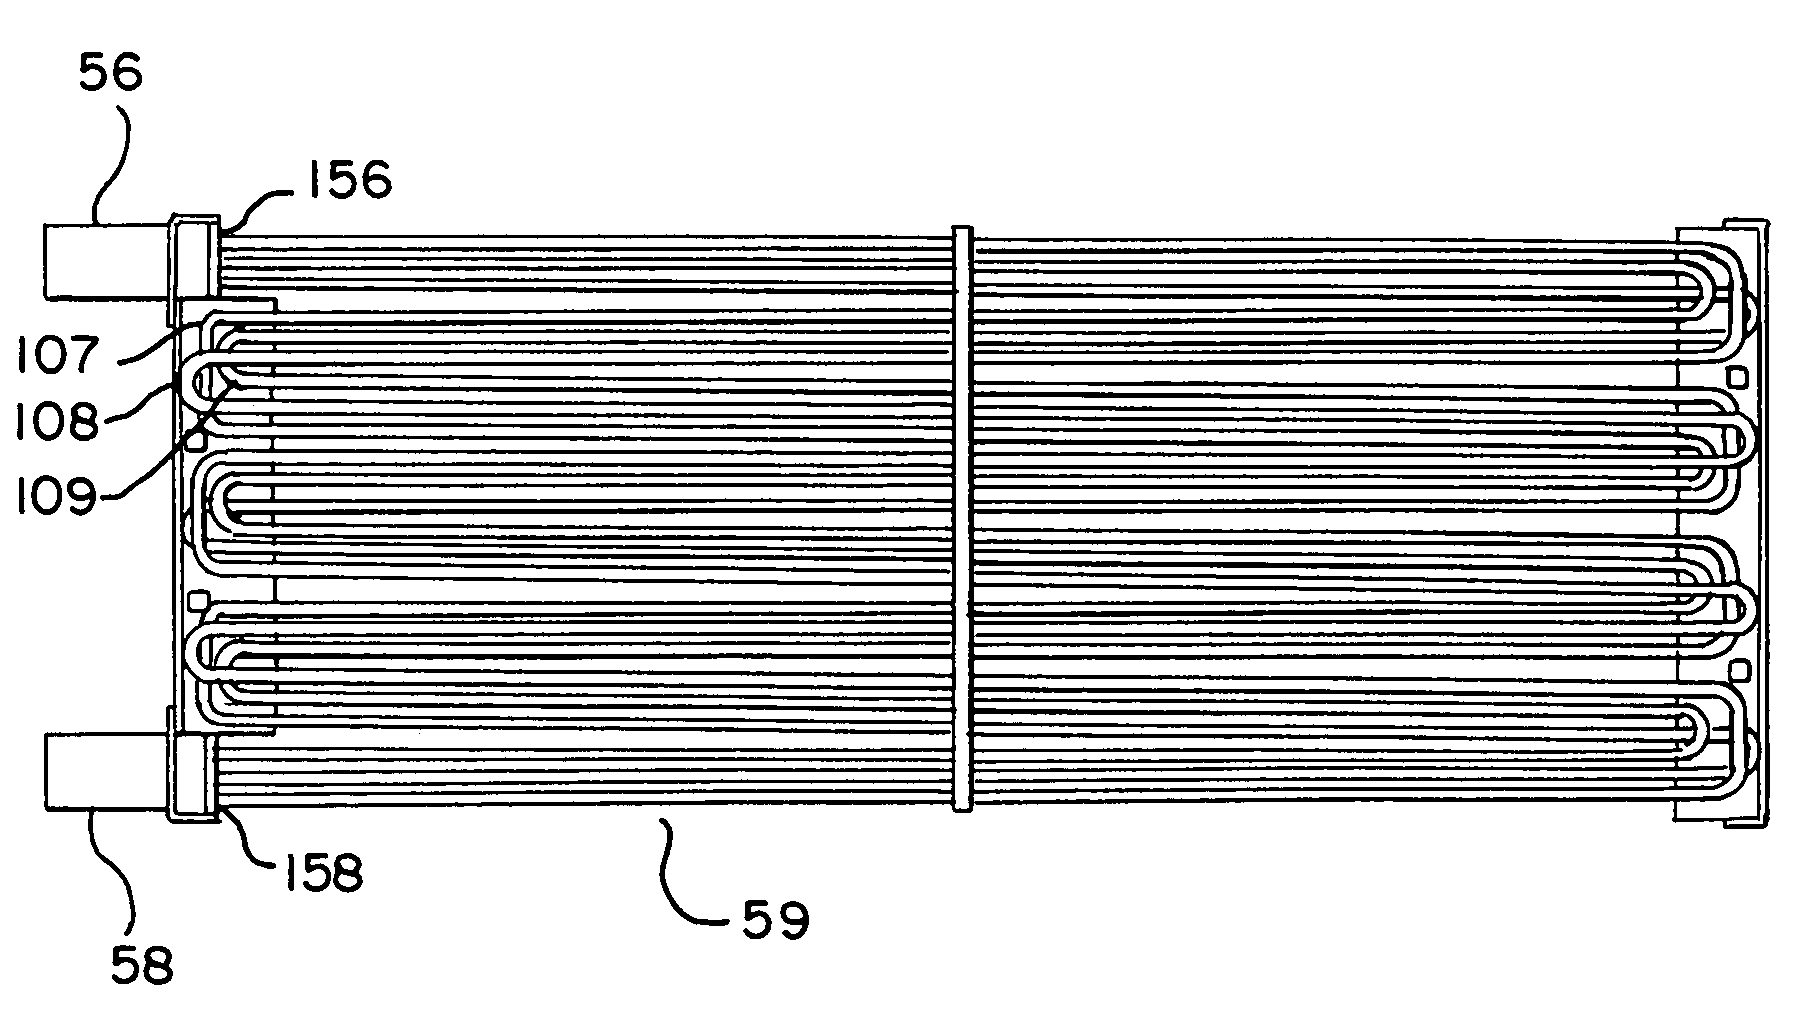 Heat transfer tube assembly with serpentine circuits